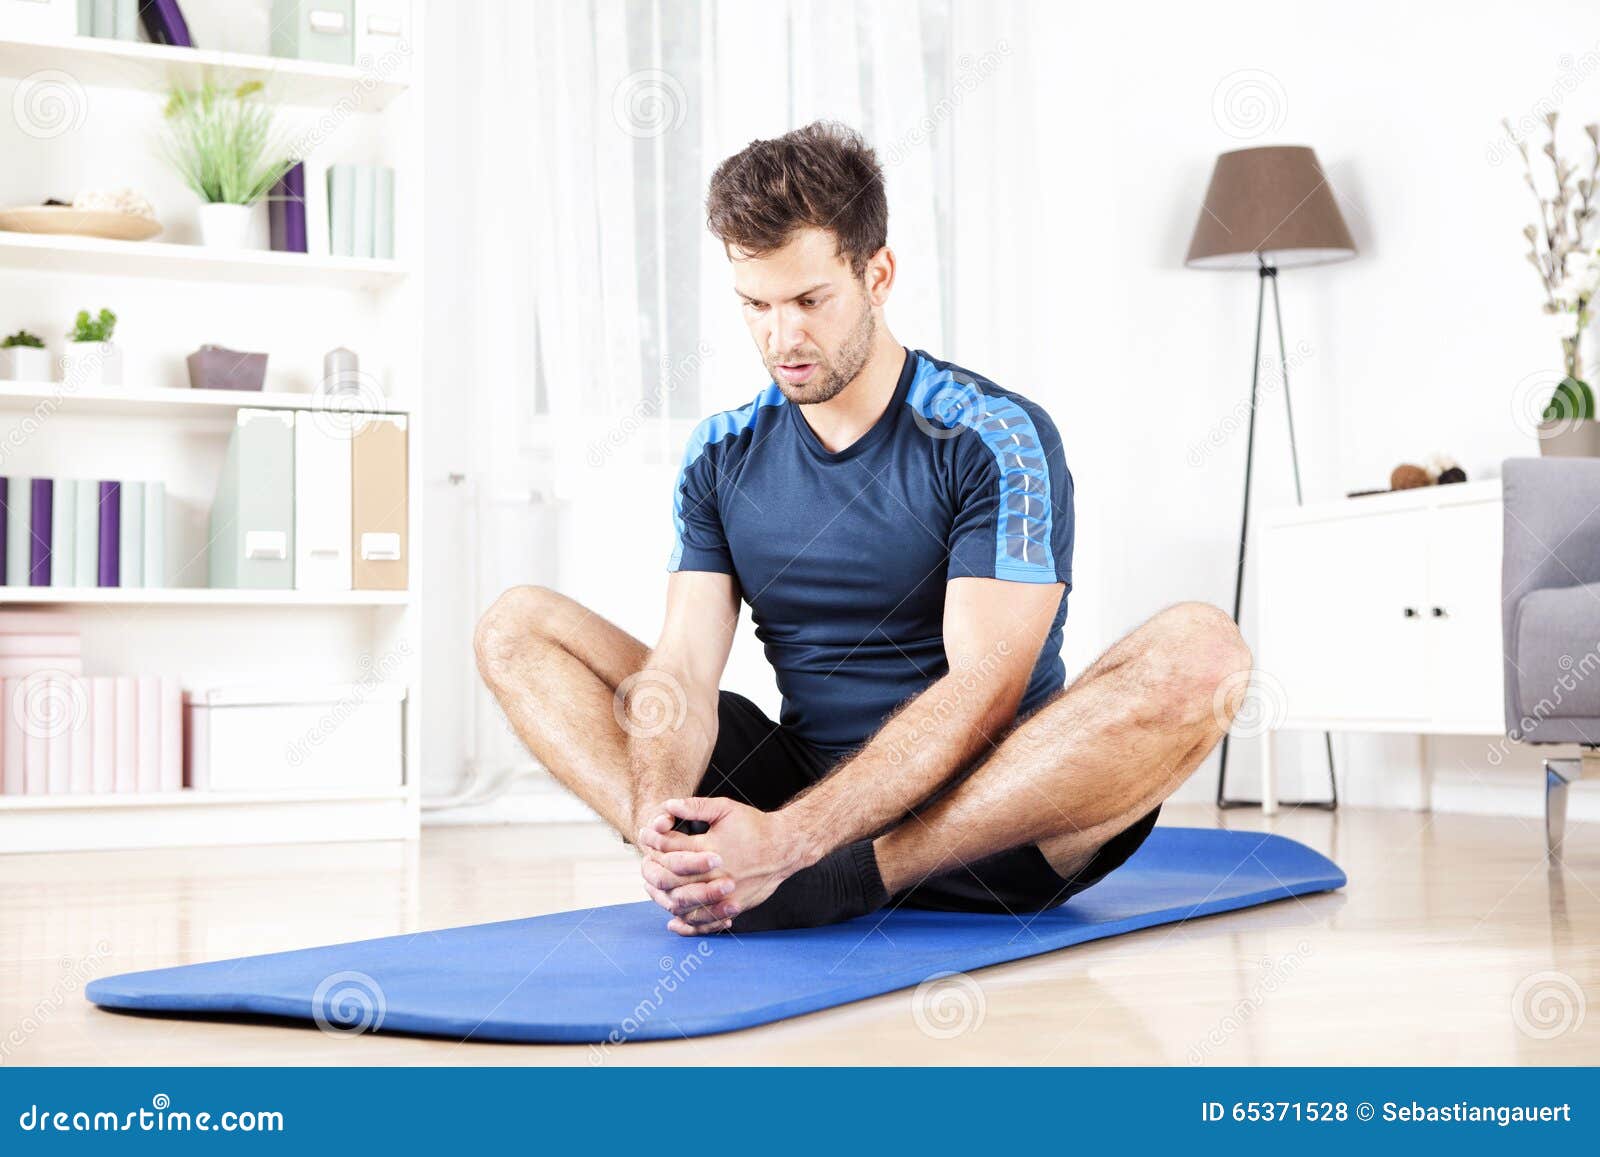 Athletic Man Doing Seated Adductor Stretch at Home Stock Photo - Image of  sporty, active: 65371528